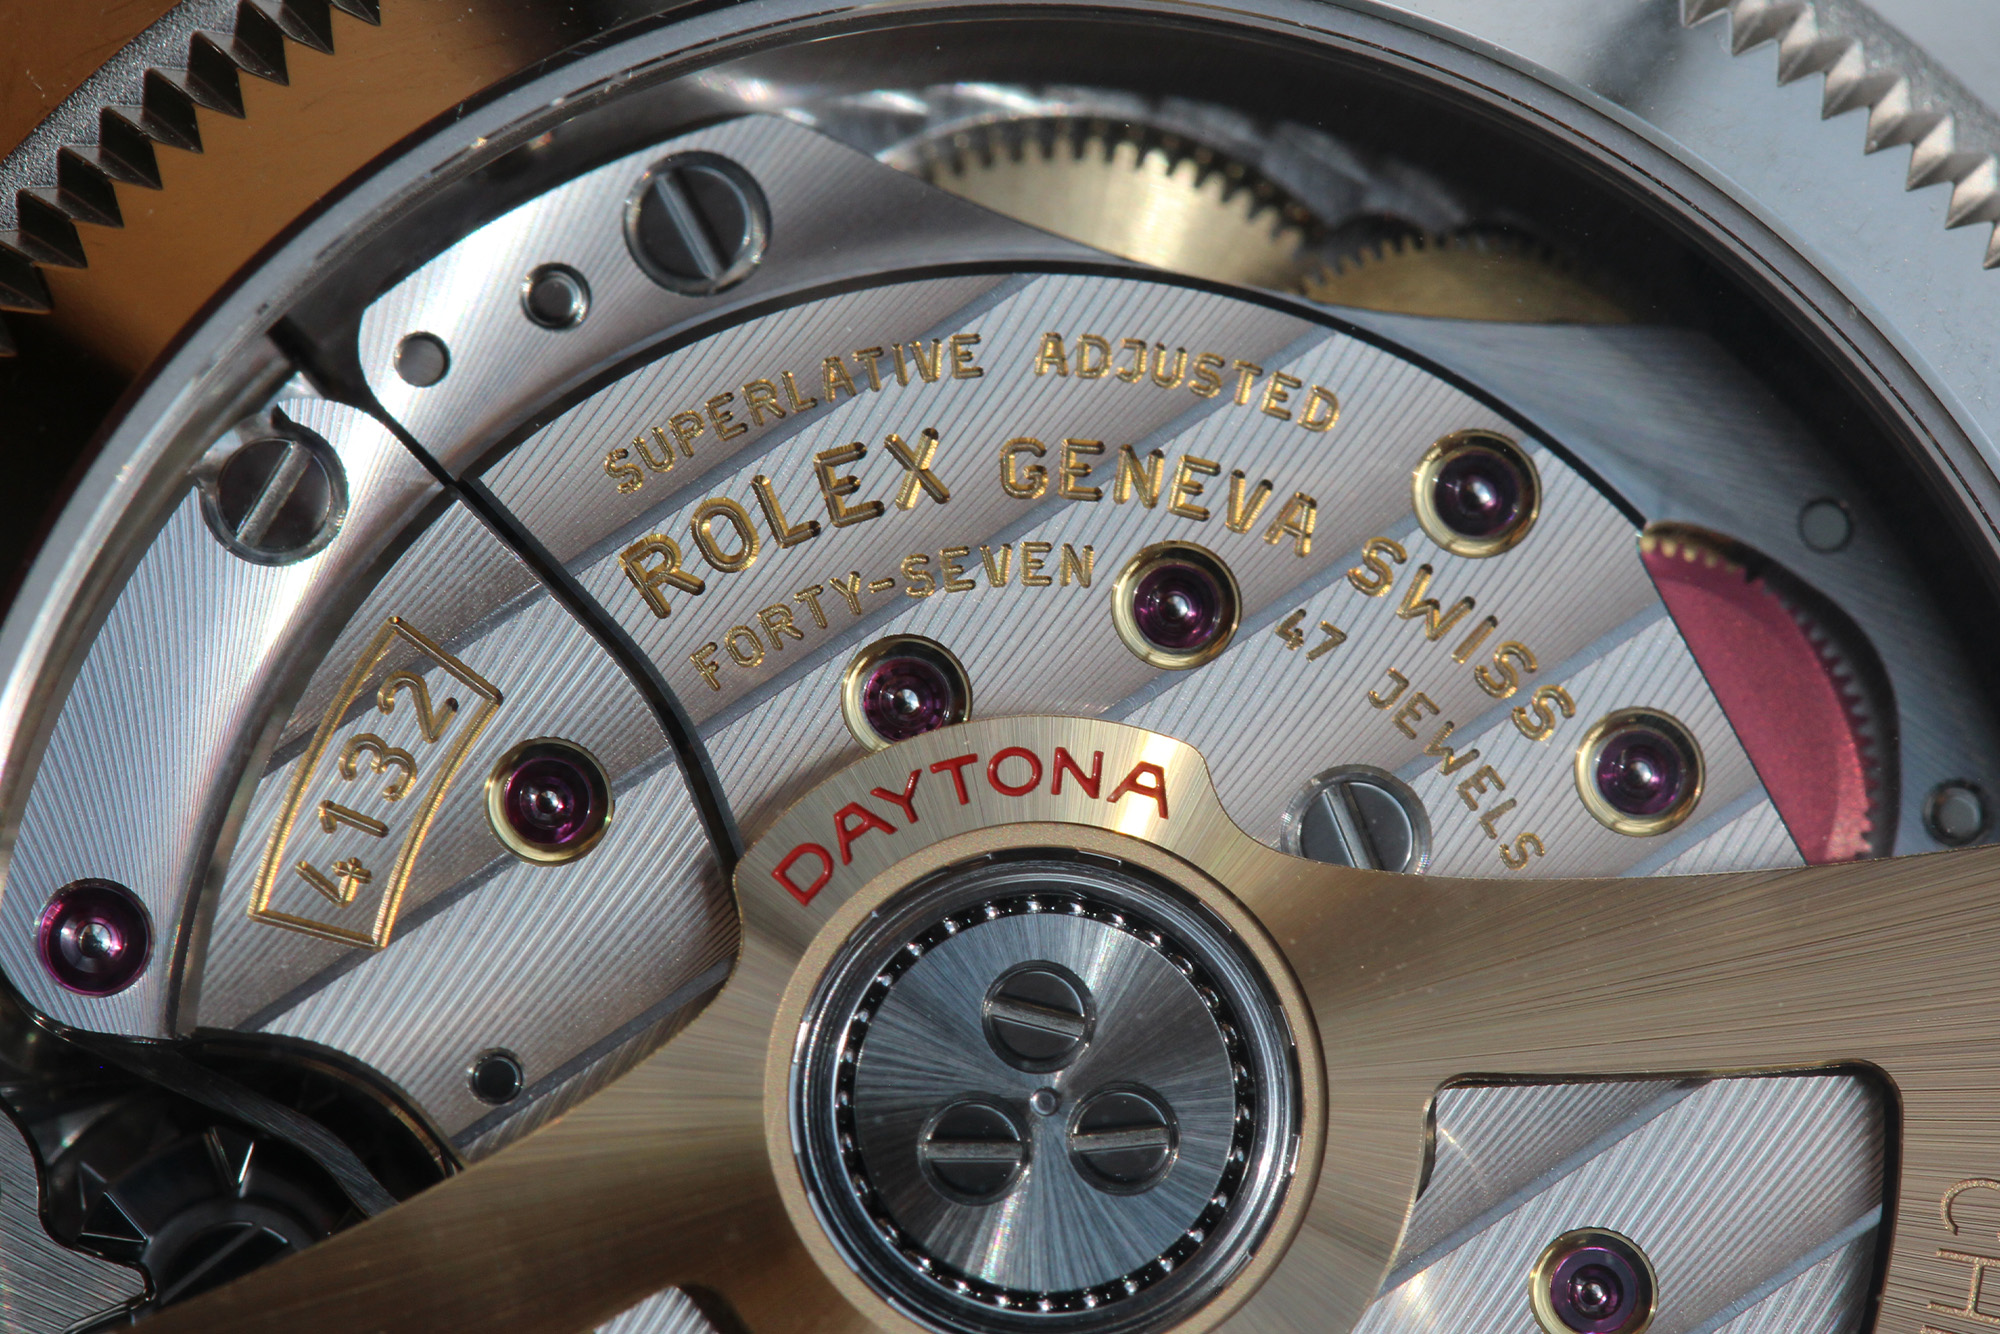 Rolex Cosmograph Daytona from the back